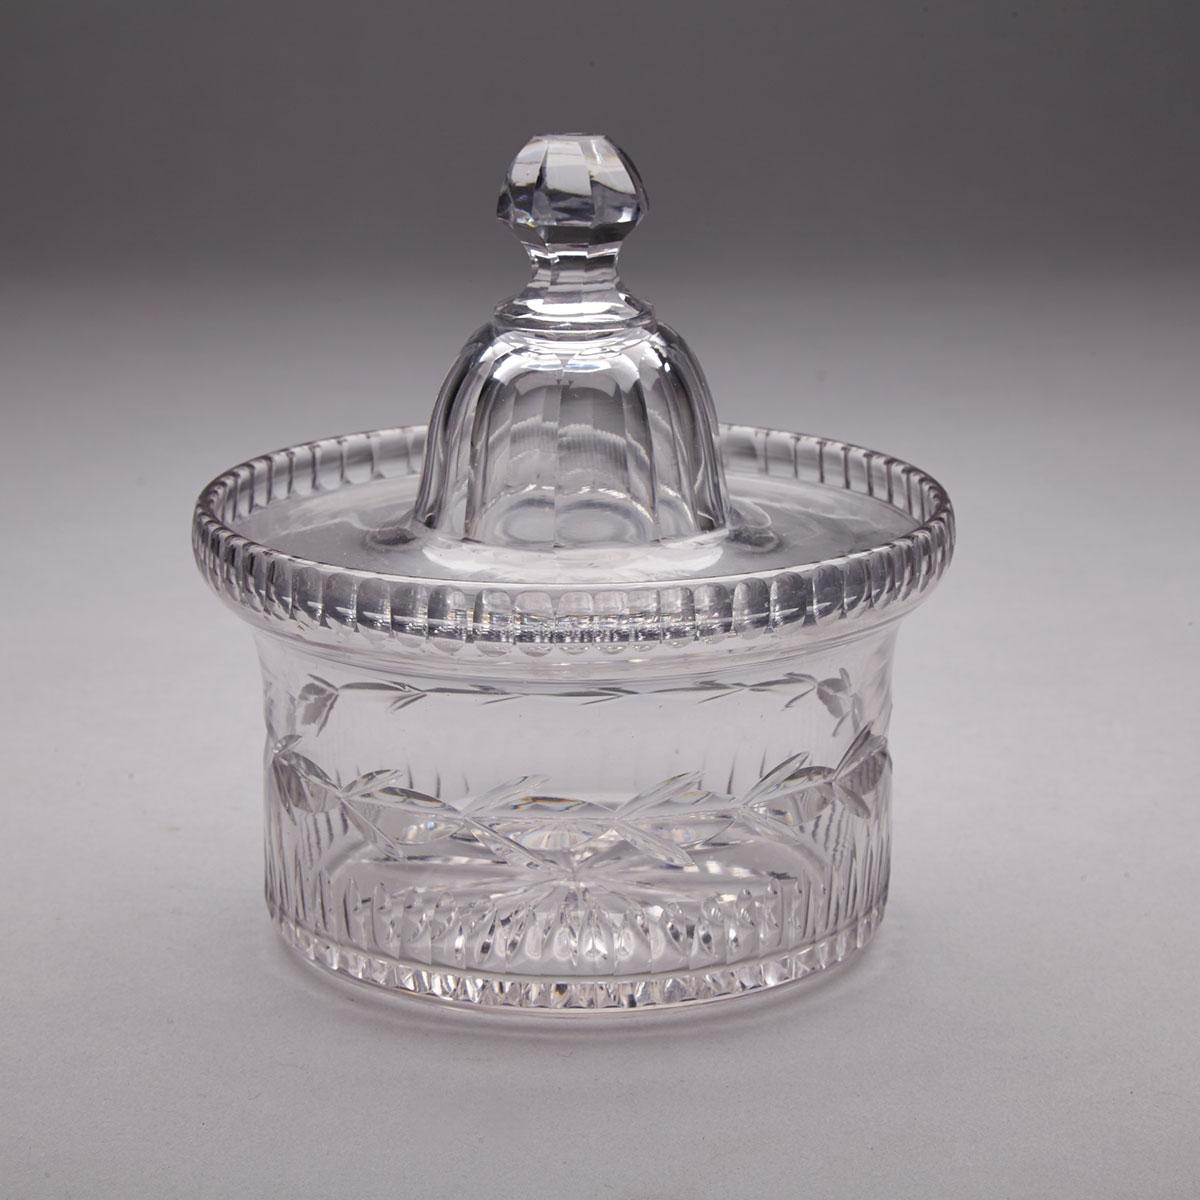 Anglo-Irish Cut Glass Covered Butter Dish, early 19th century